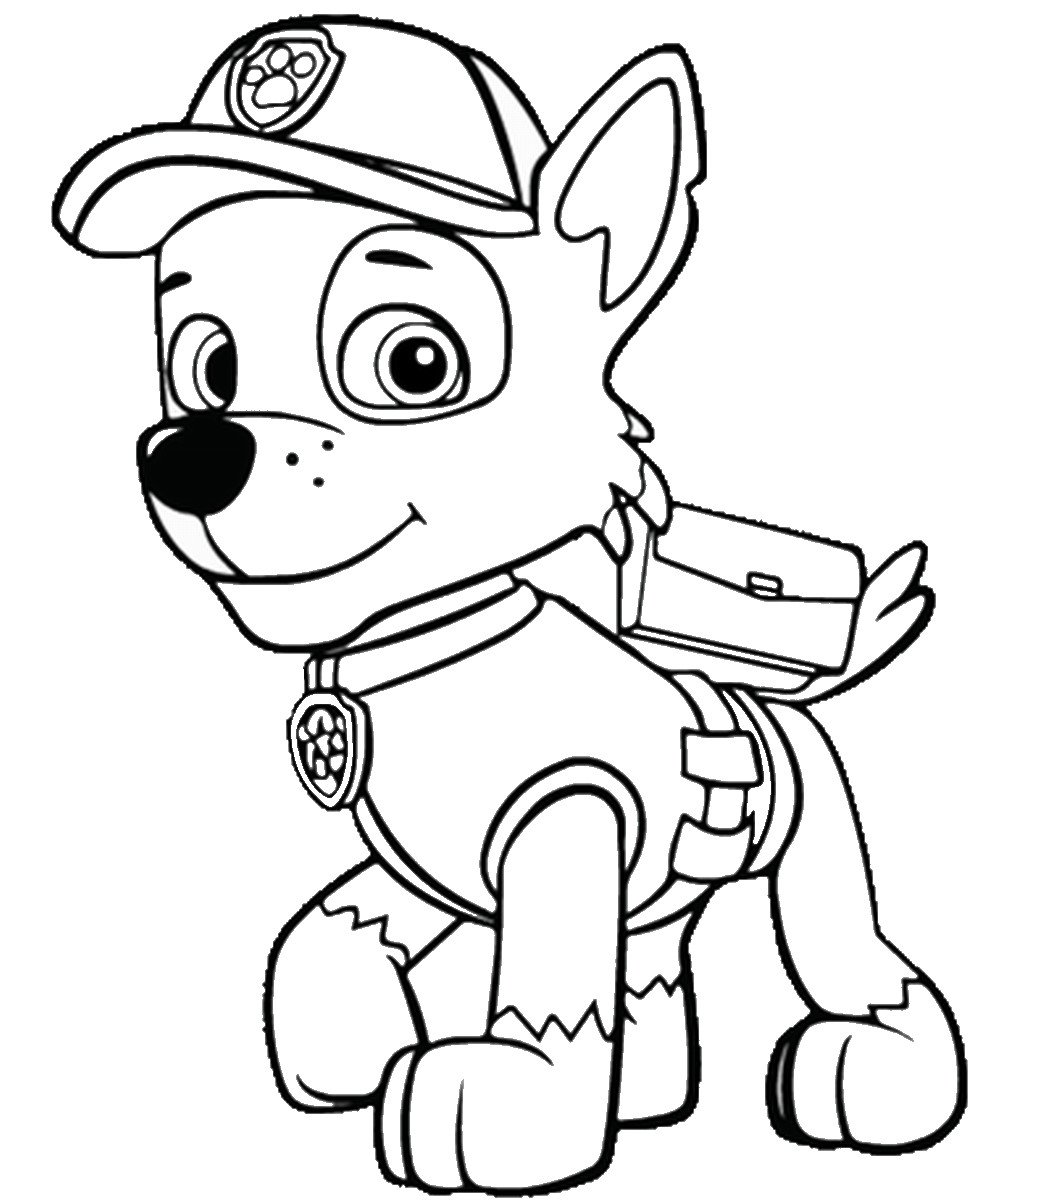 Free Printable Coloring Sheets
 Paw Patrol Coloring Pages Best Coloring Pages For Kids